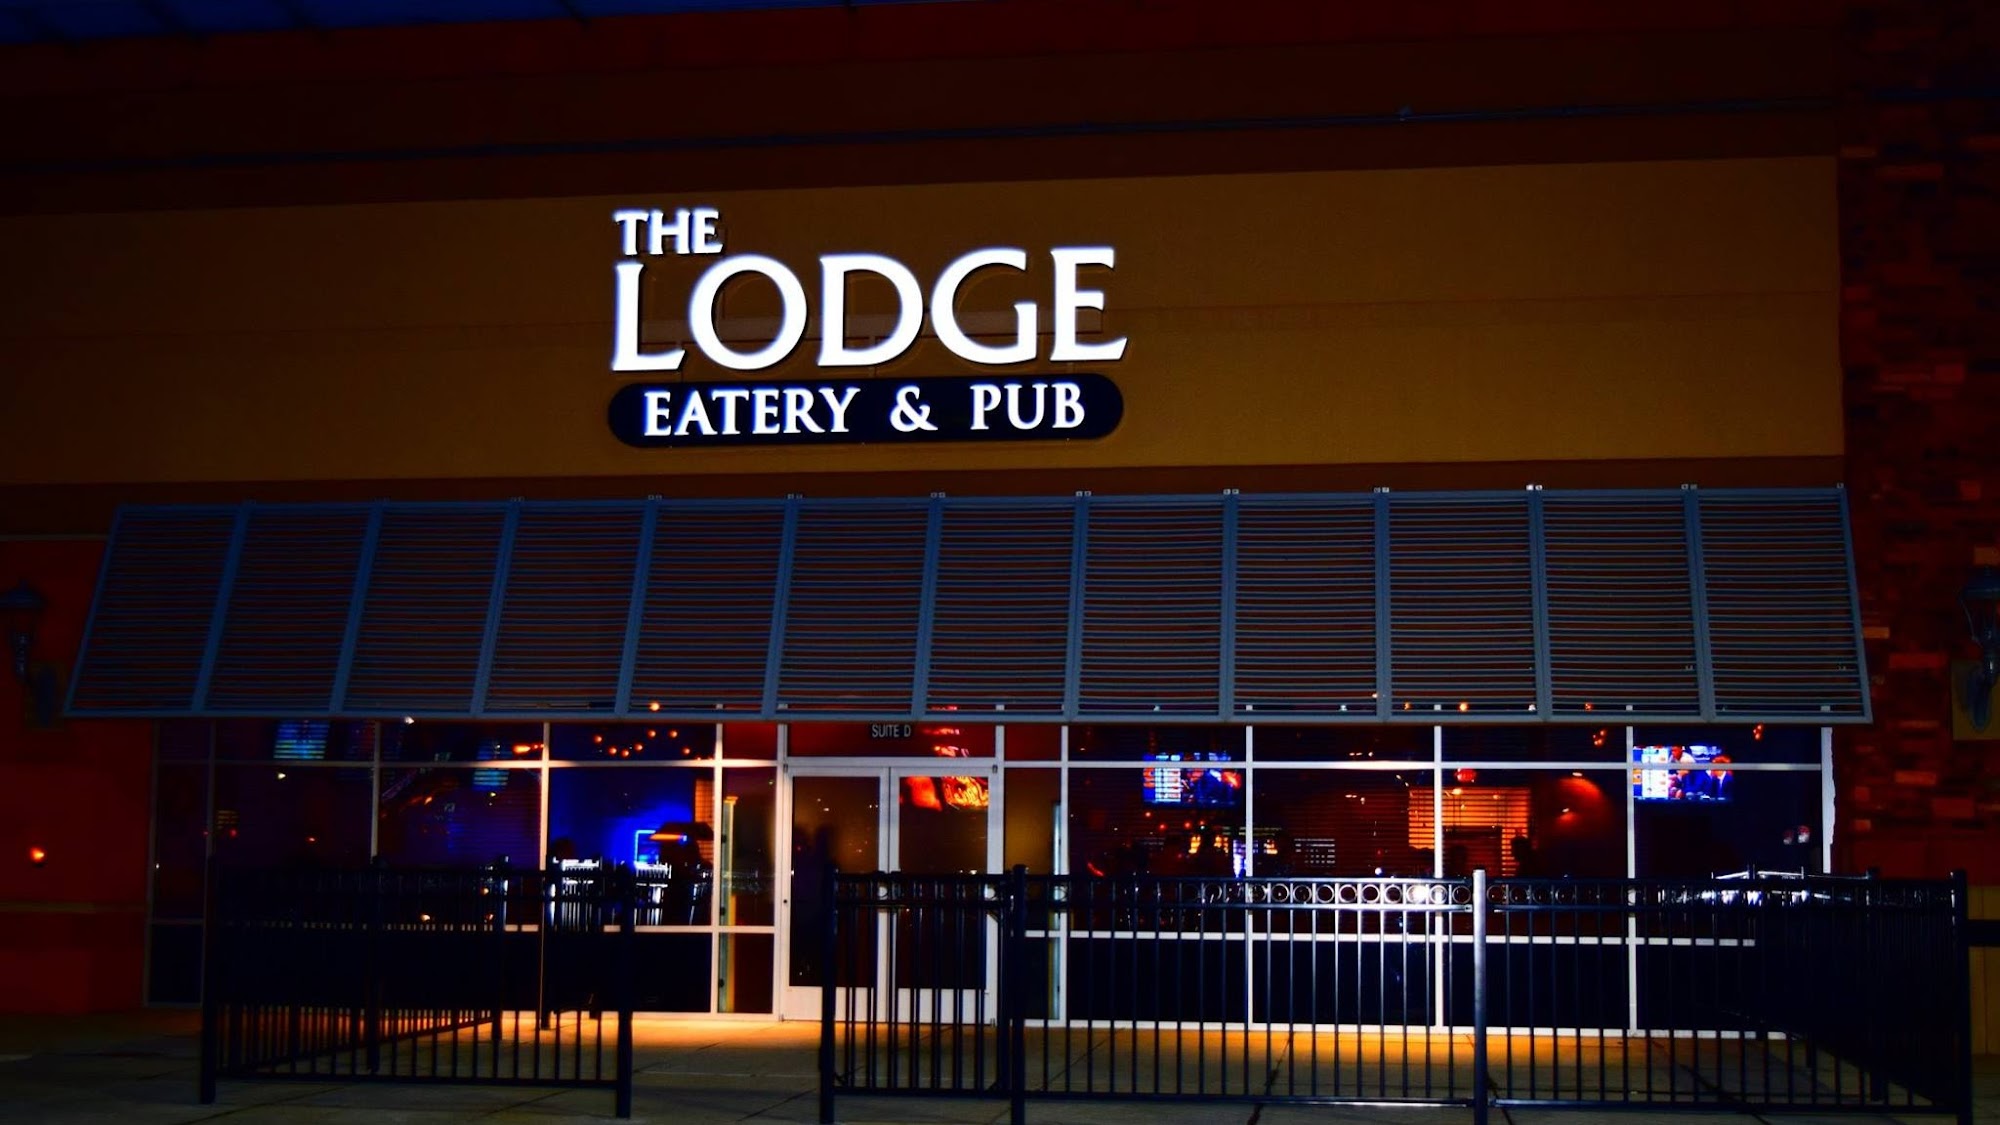 The Lodge Eatery and Pub